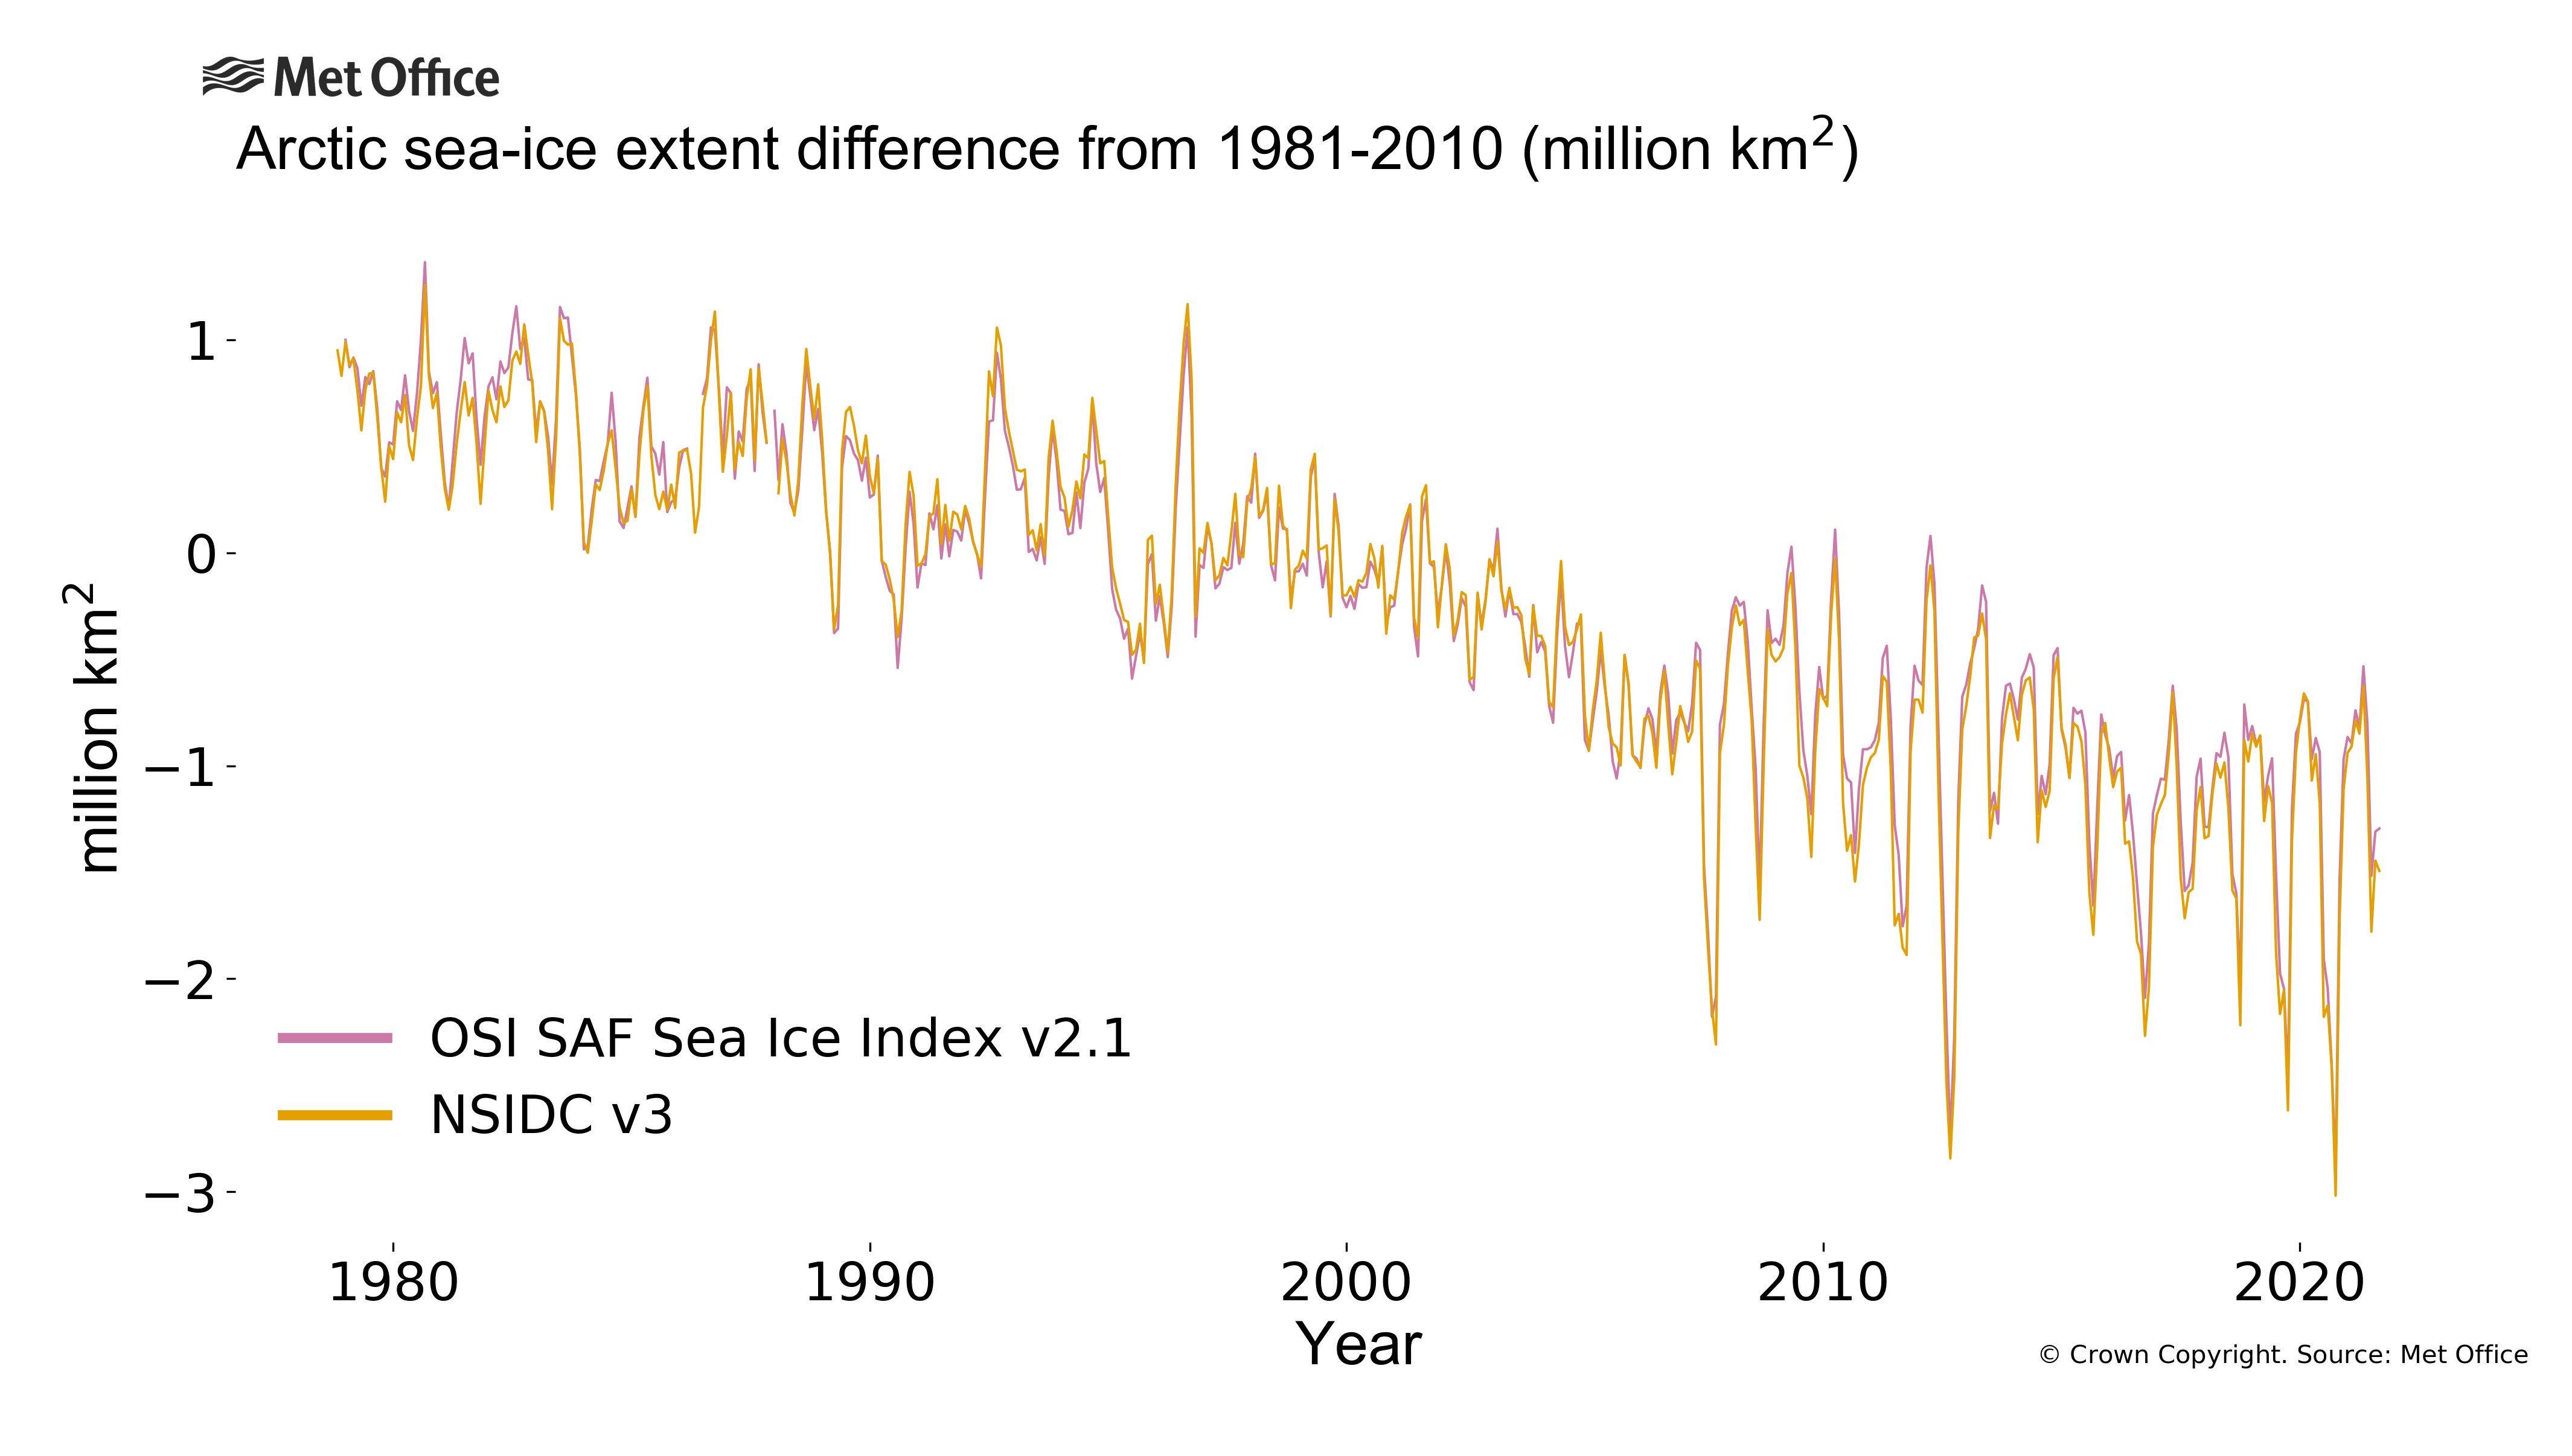 
Monthly arctic sea ice extent difference from the 1981-2010 average.
